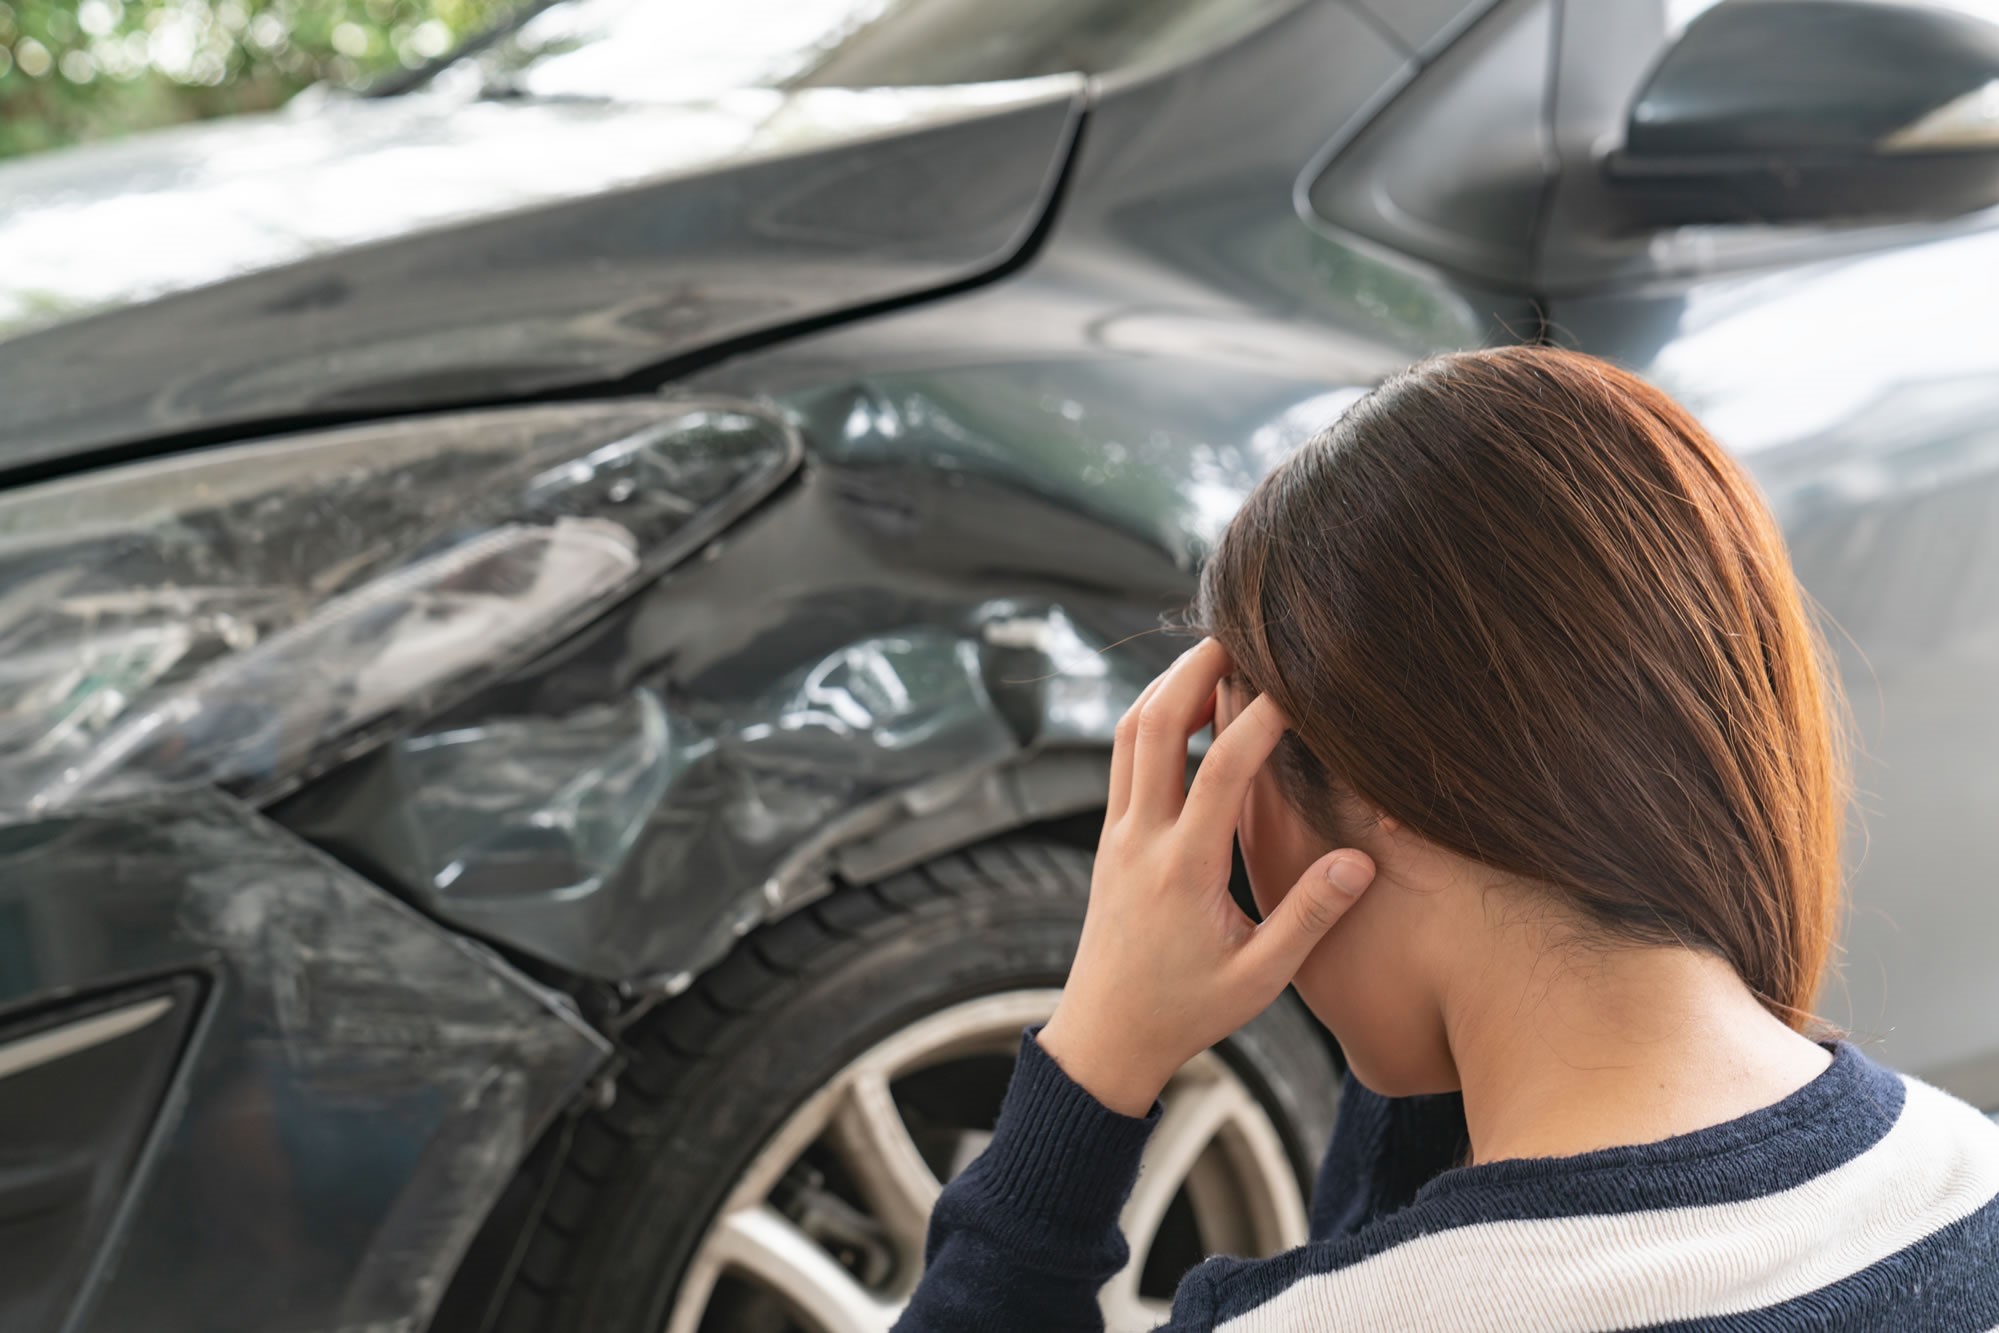 Road Traffic Accident Wakefield - Car Accident Claim - claims / injury / compensation / lawyer